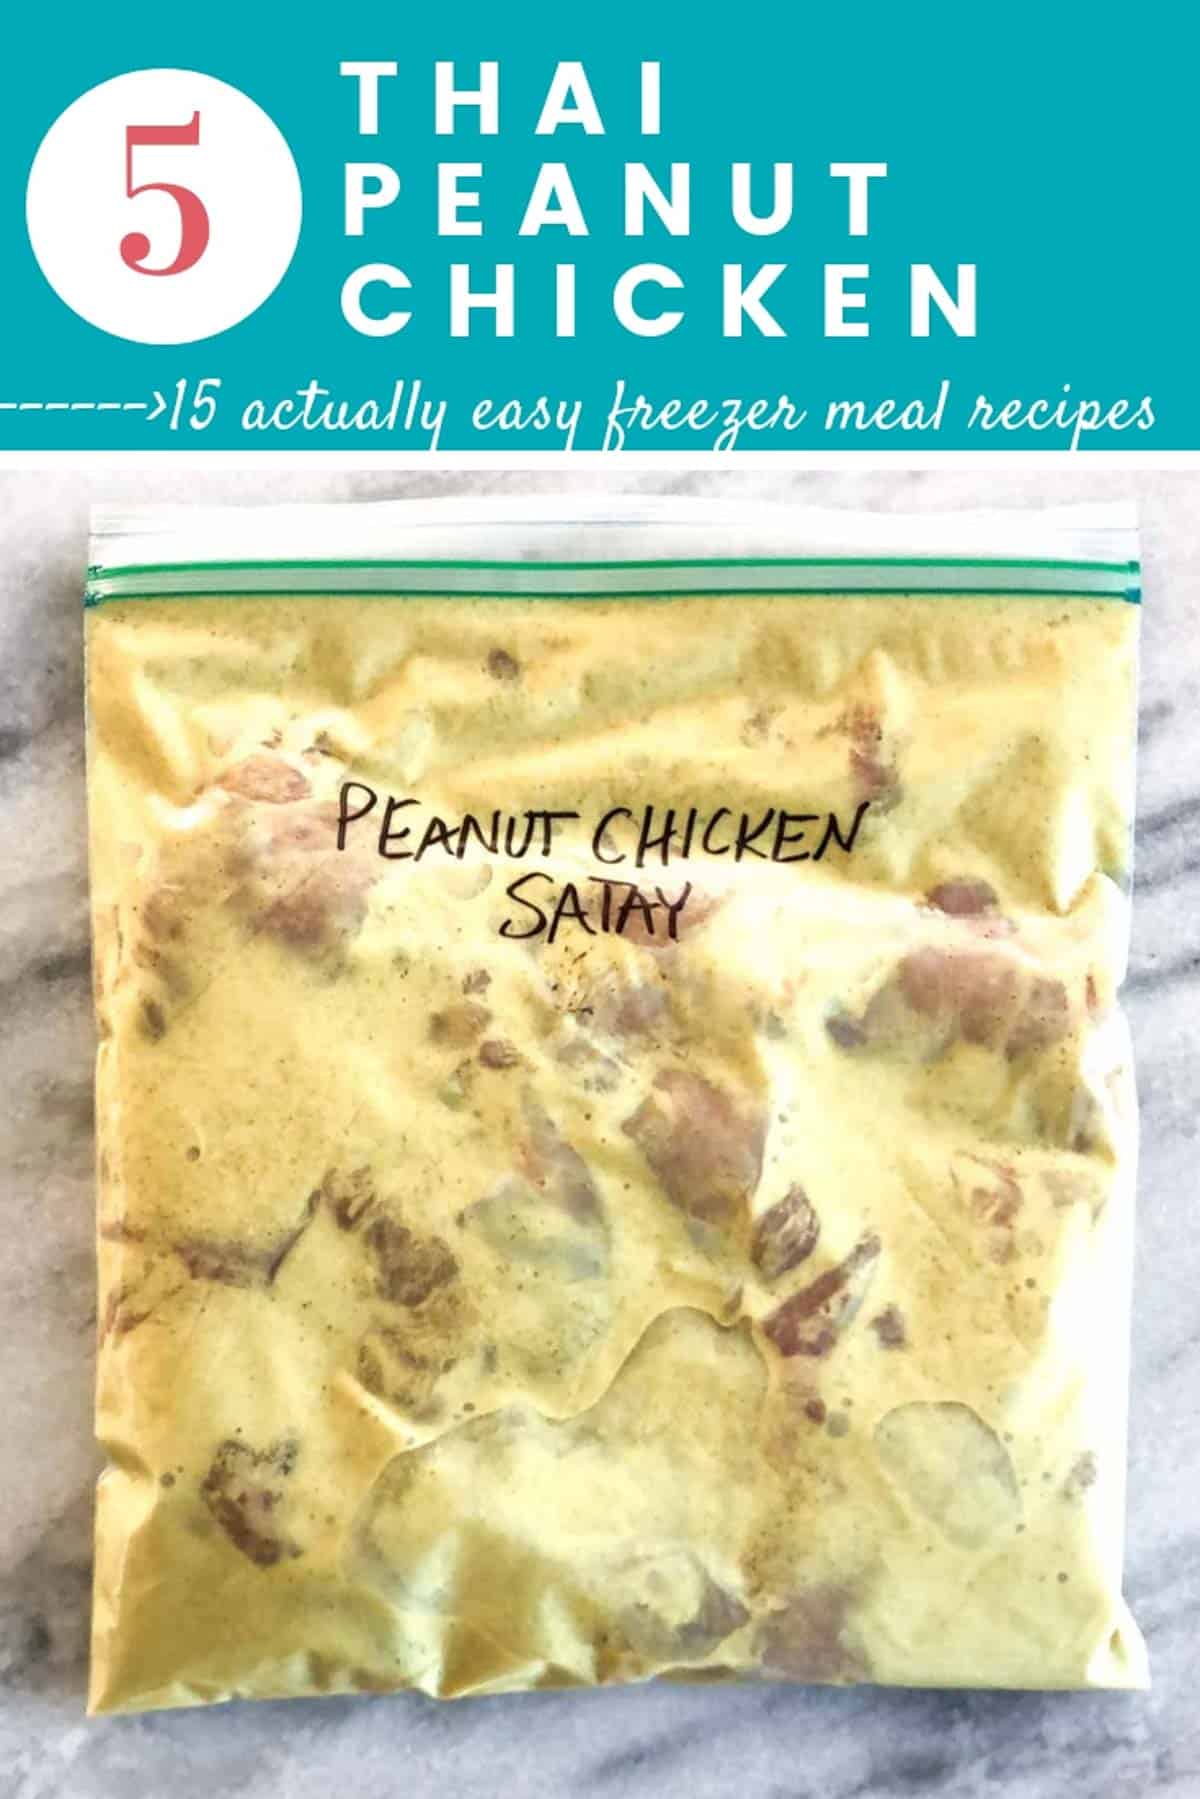 Easy chicken freezer meal recipes like this Thai Peanut Chicken in a freezer bag are delish!